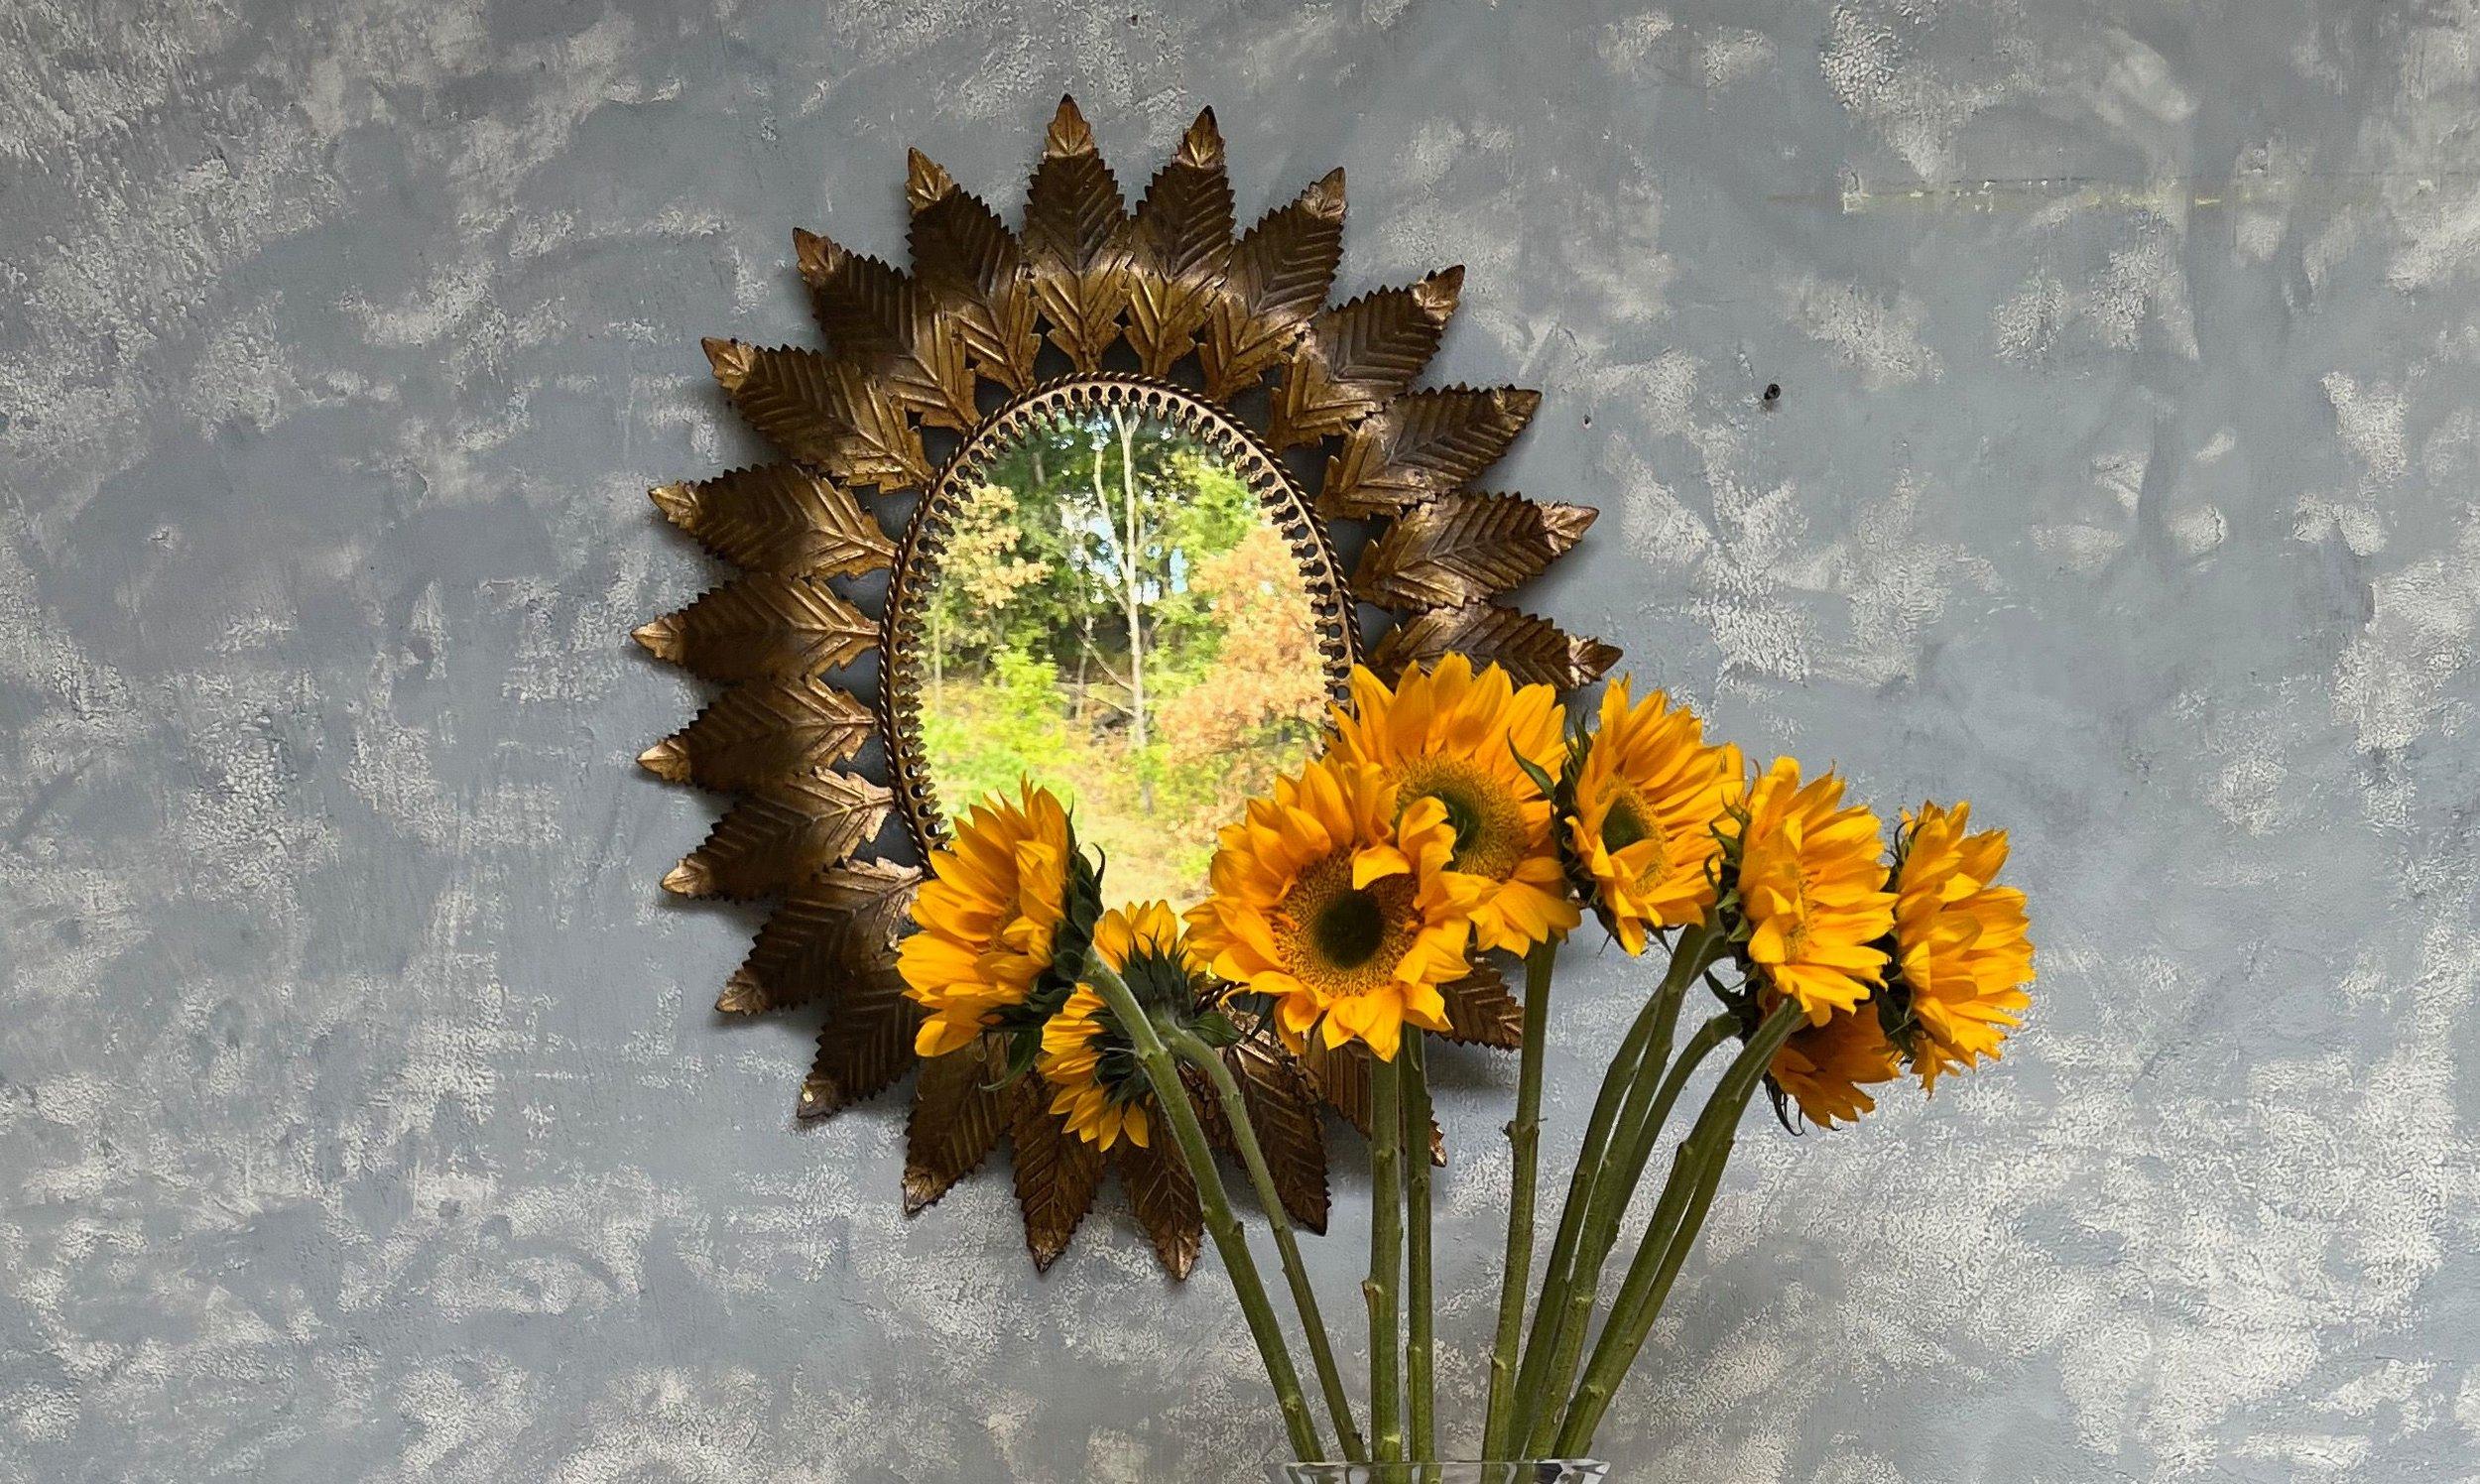 Spanish Oval Gilt Metal Sunburst Mirror With Curved Radiating Leaves For Sale 3